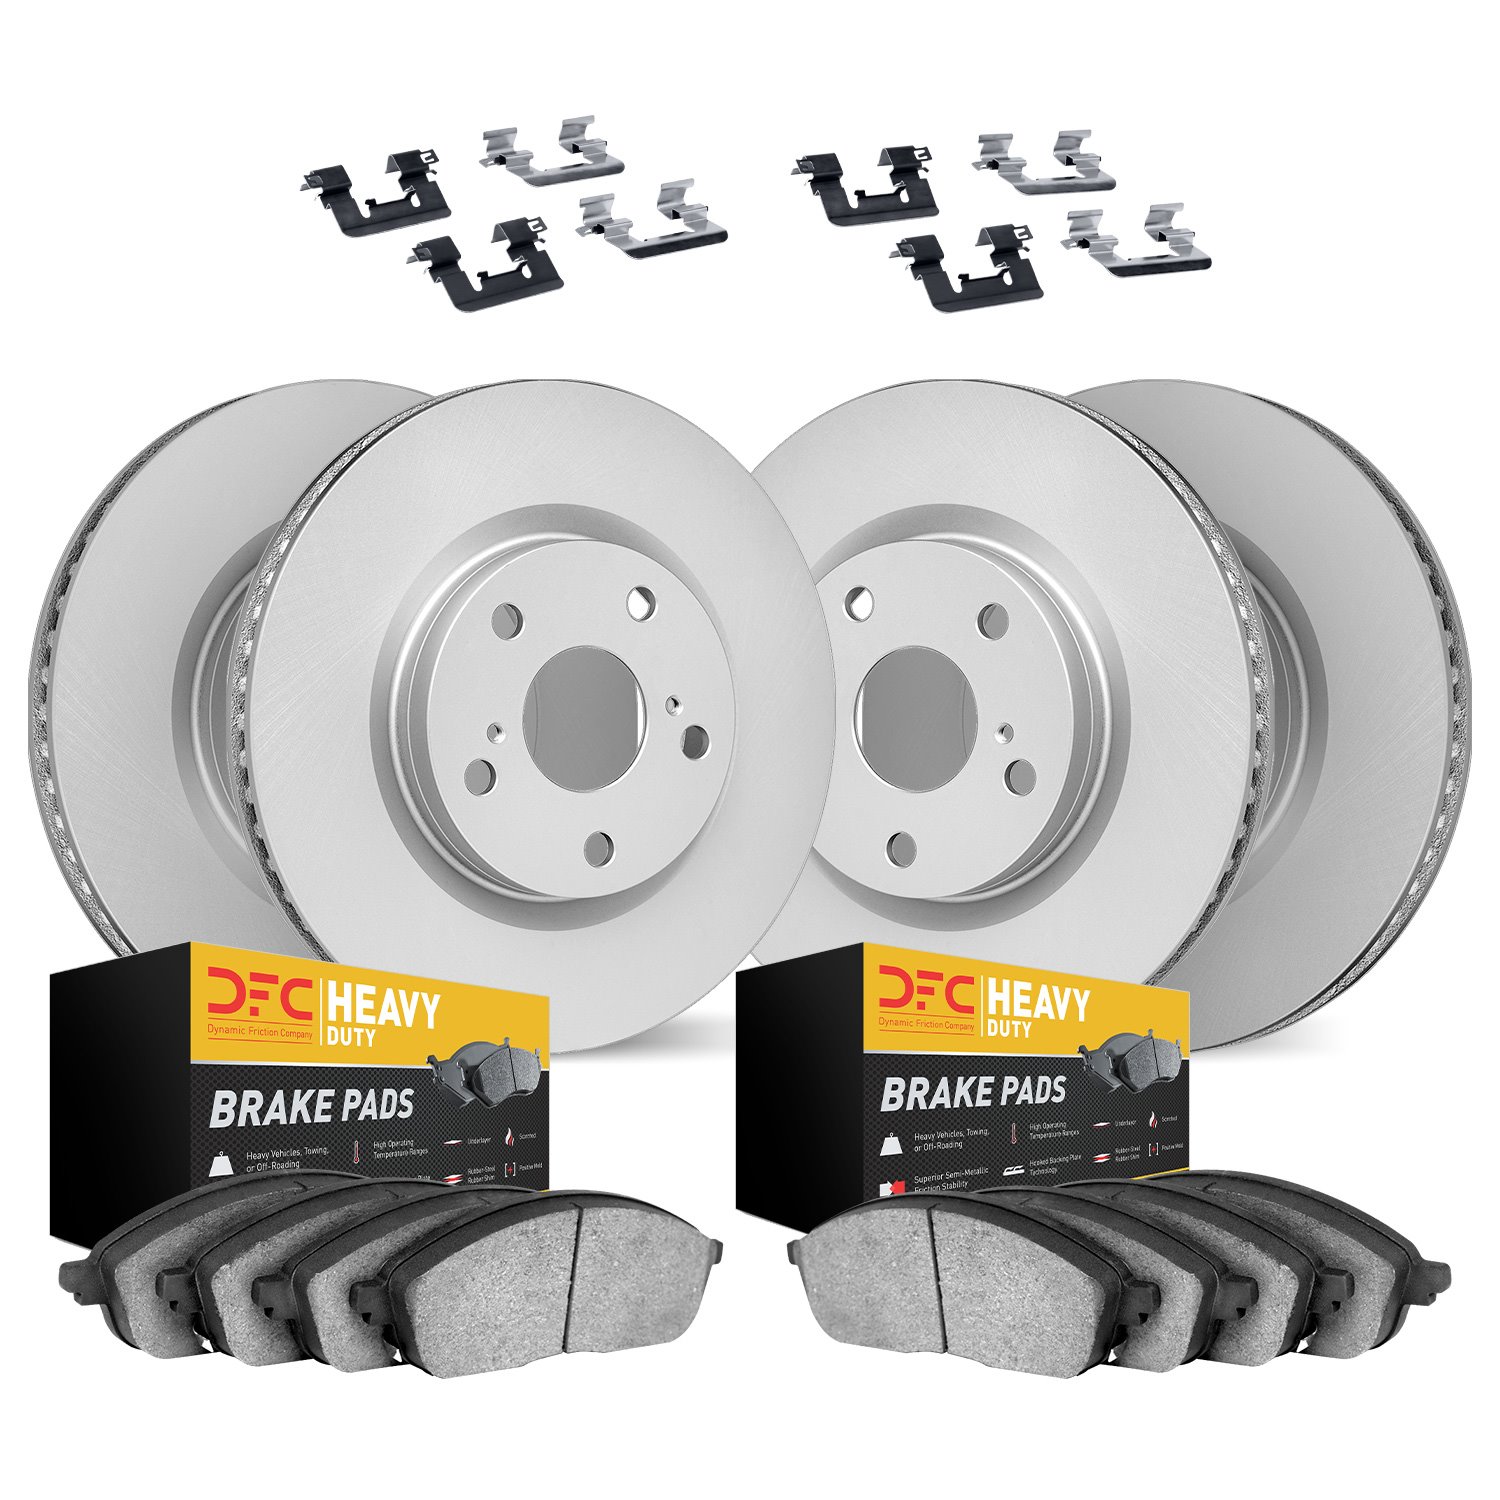 4214-54086 Geospec Brake Rotors w/Heavy-Duty Brake Pads & Hardware, 2013-2019 Ford/Lincoln/Mercury/Mazda, Position: Front and Re